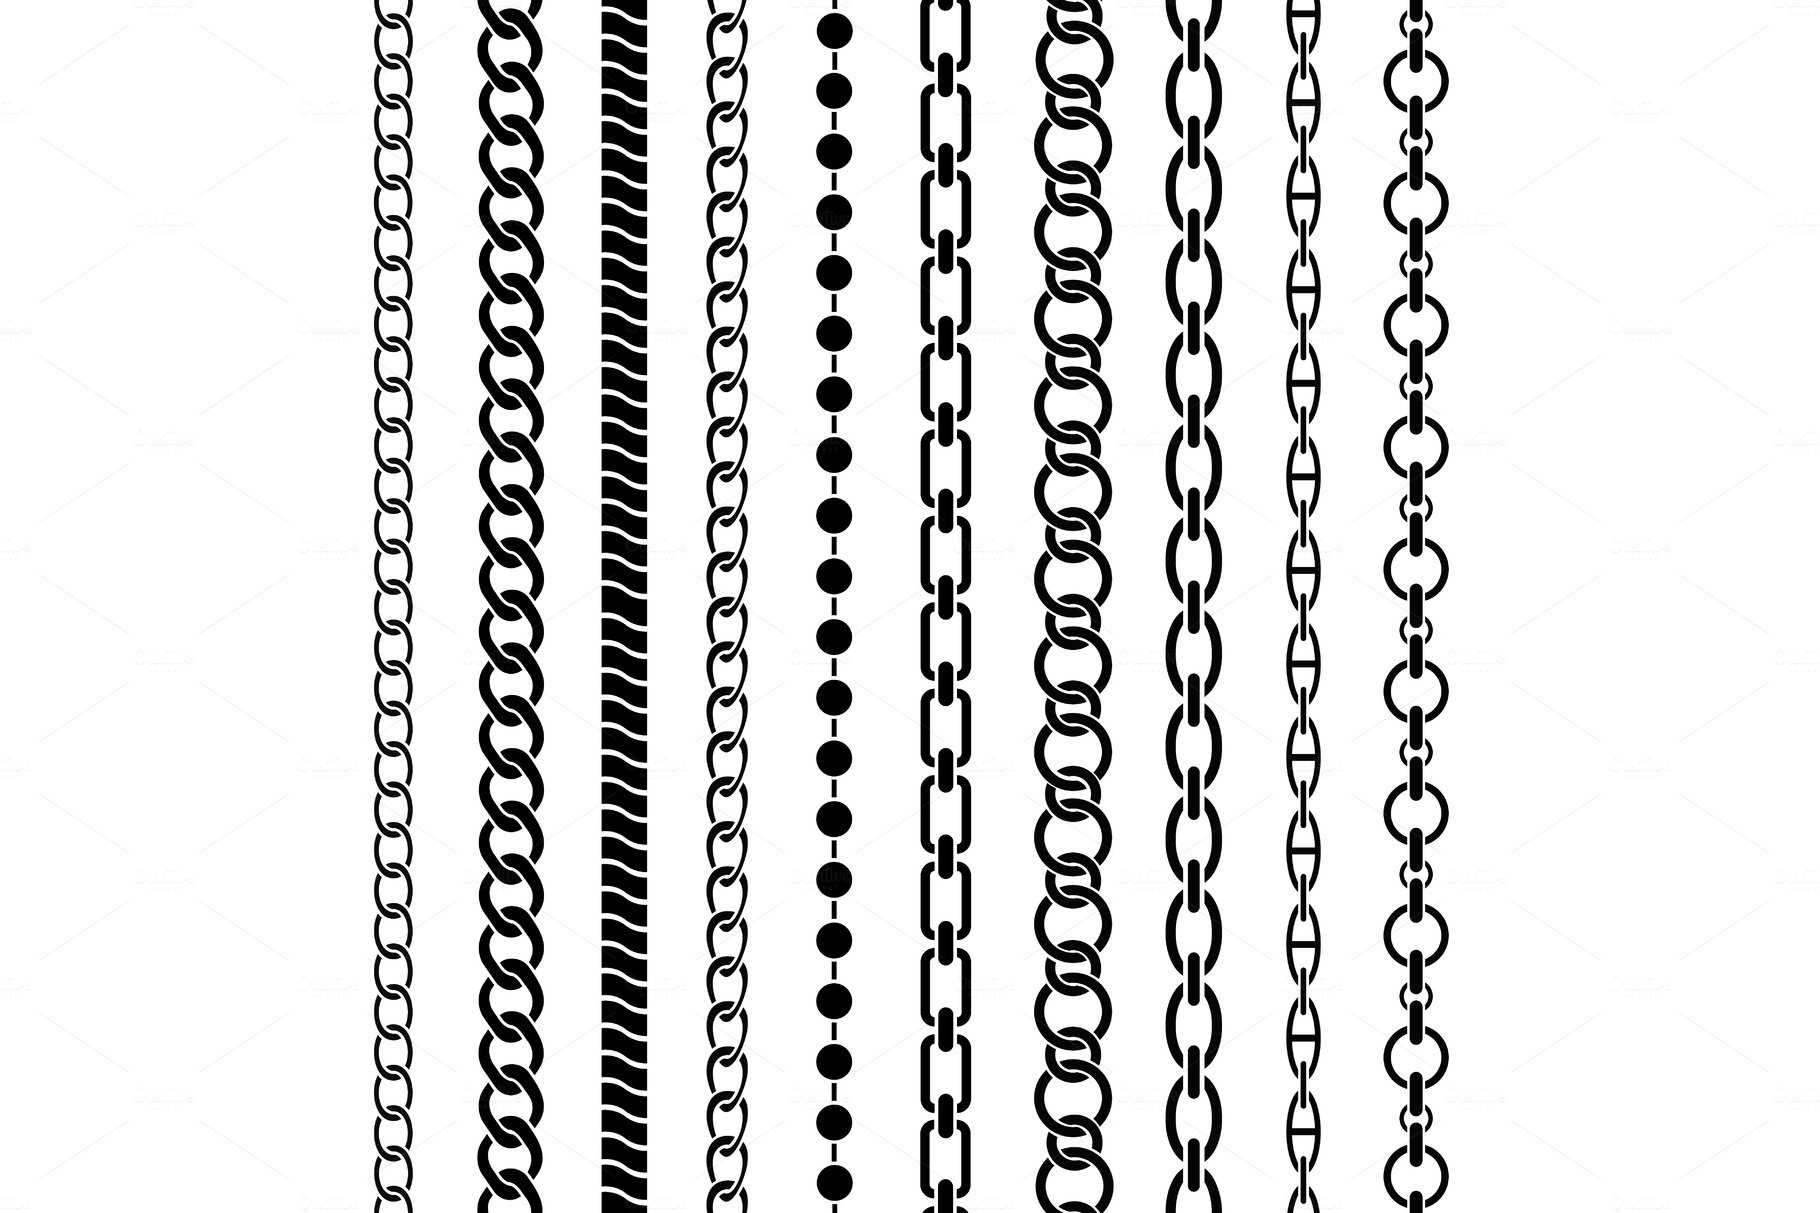 Chain borders. Seamless black chains cover image.